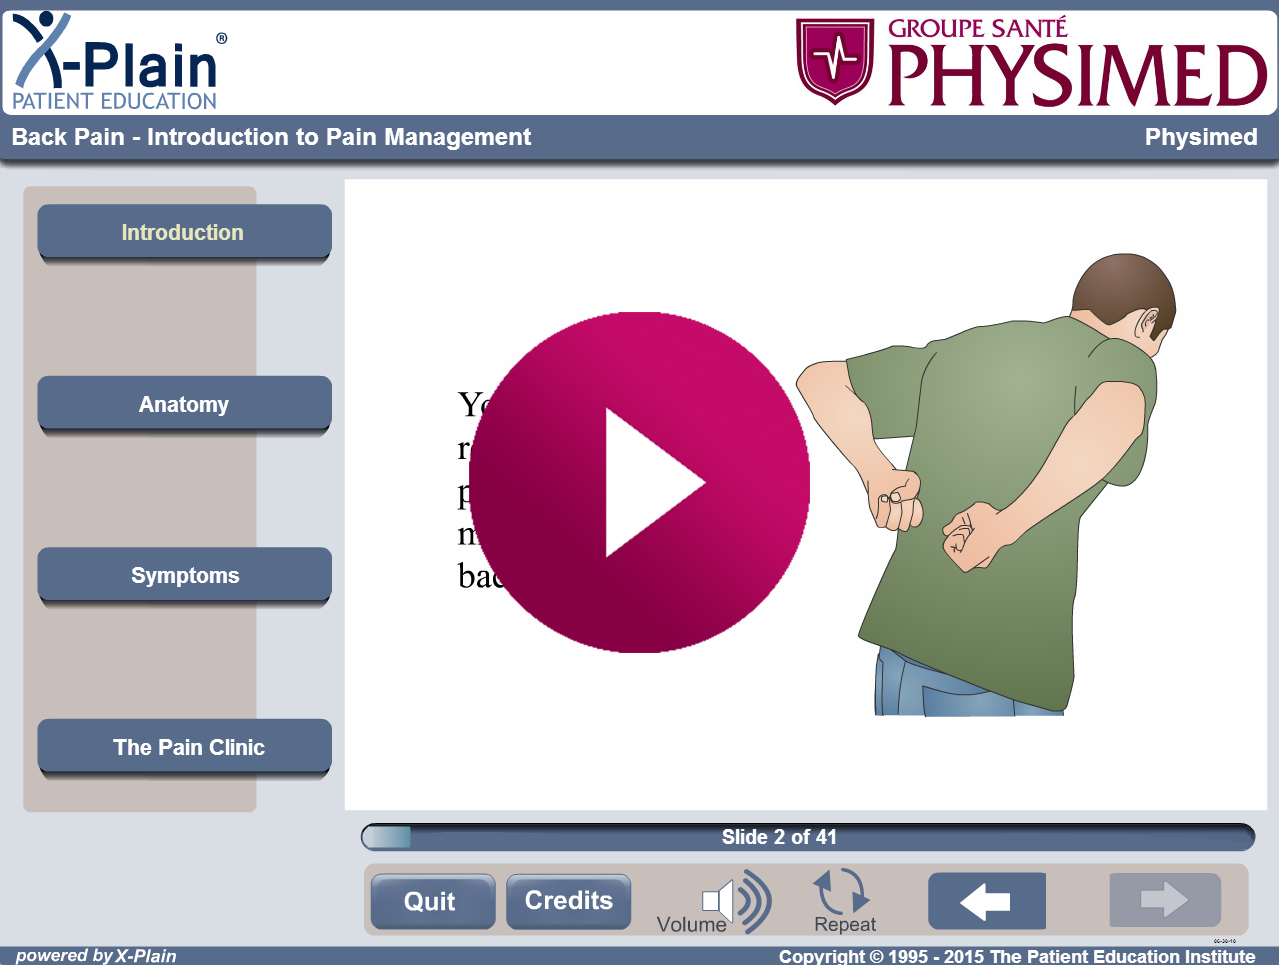 Back Pain - Introduction to Pain Management